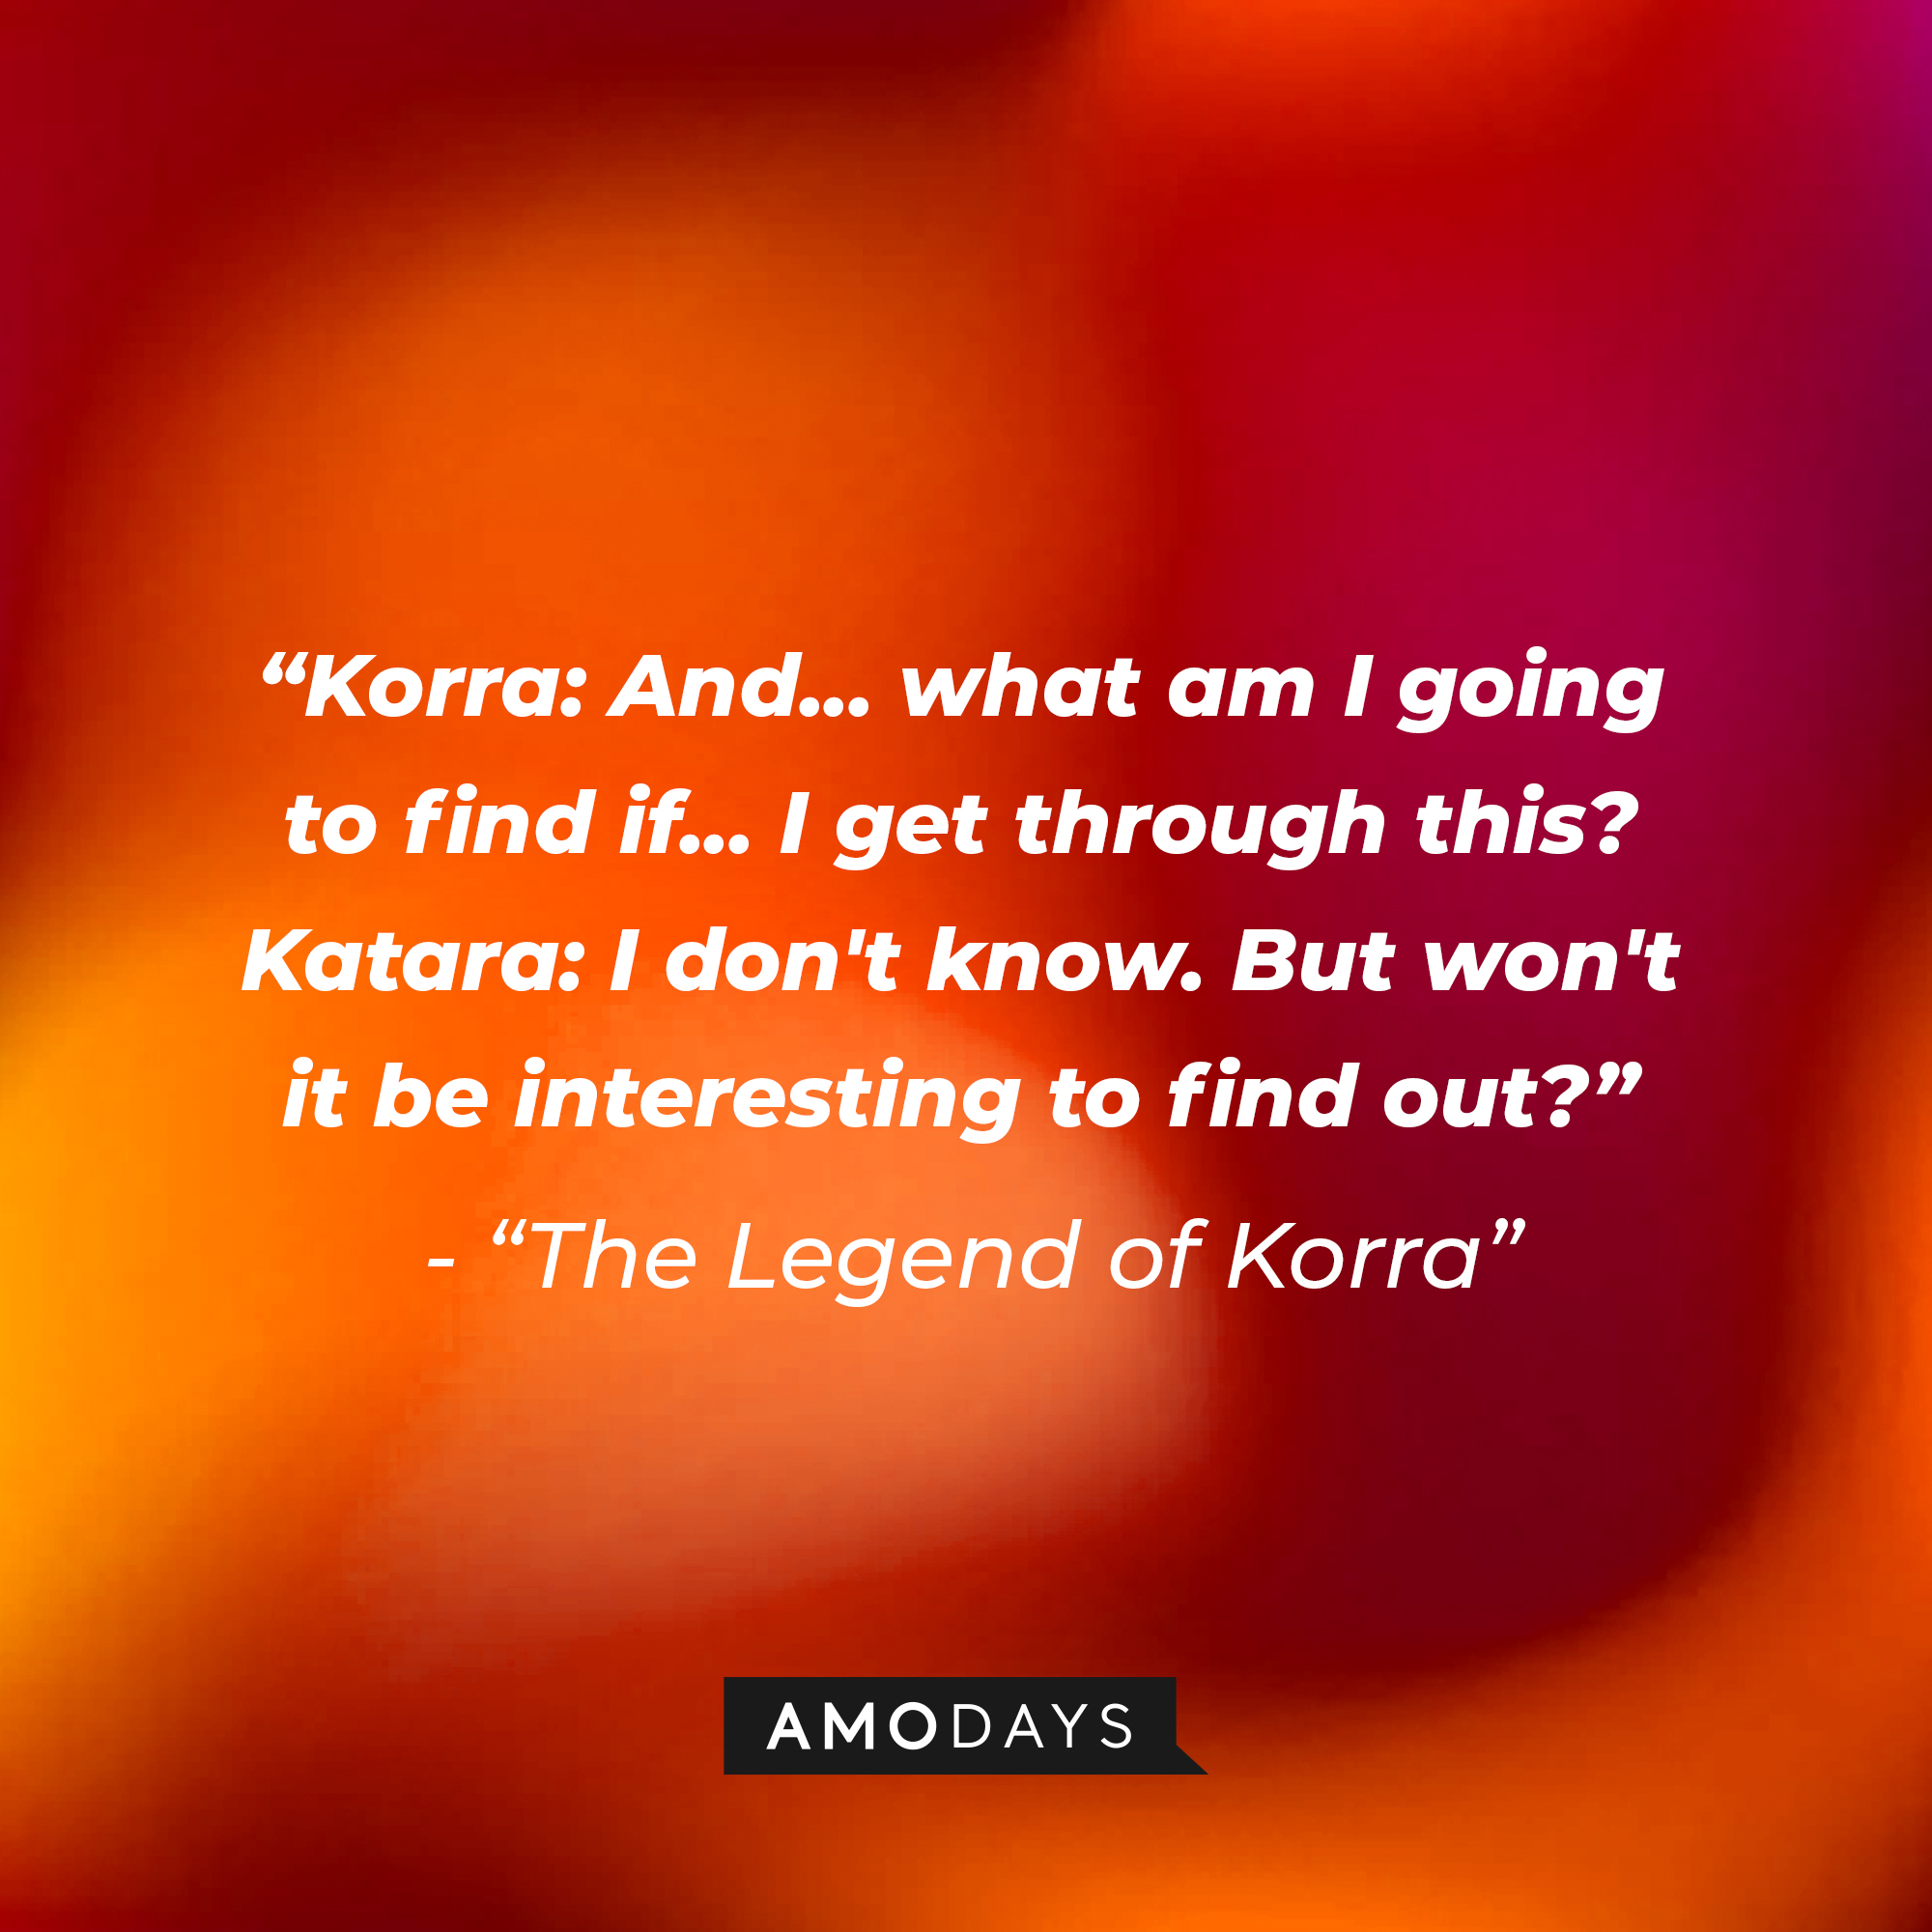 Korra and Katara’s quote in “Avatar: The Legend of Korra:” "Korra: And... what am I going to find if... I get through this? ; Katara: I don't know. But won't it be interesting to find out?" | Source: Amodays